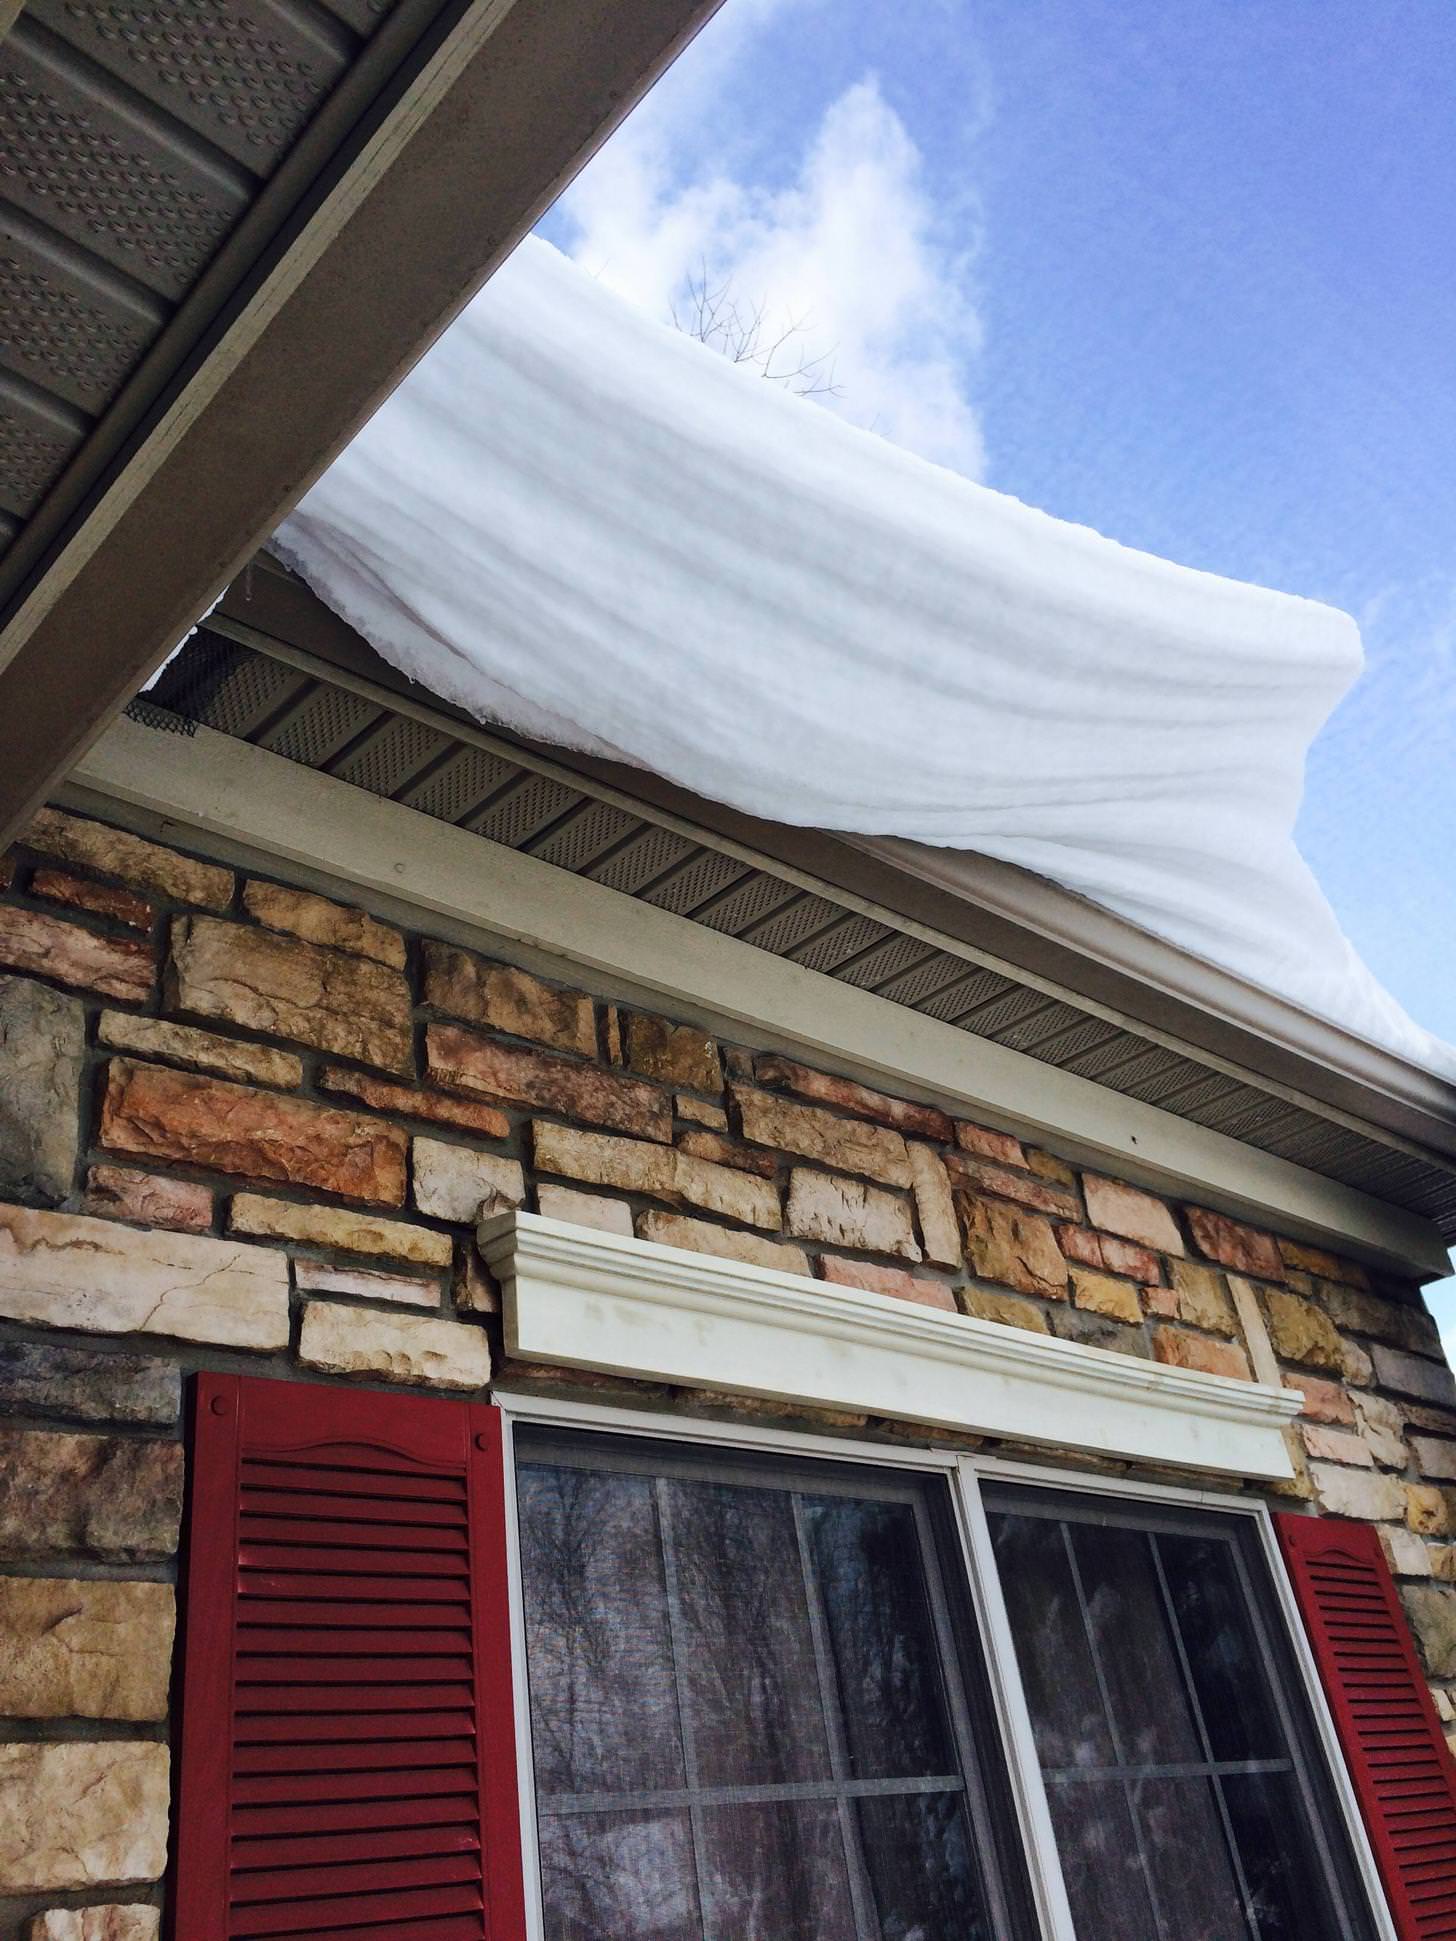 The melting snow on the roof caused a snow shelf - Imgur